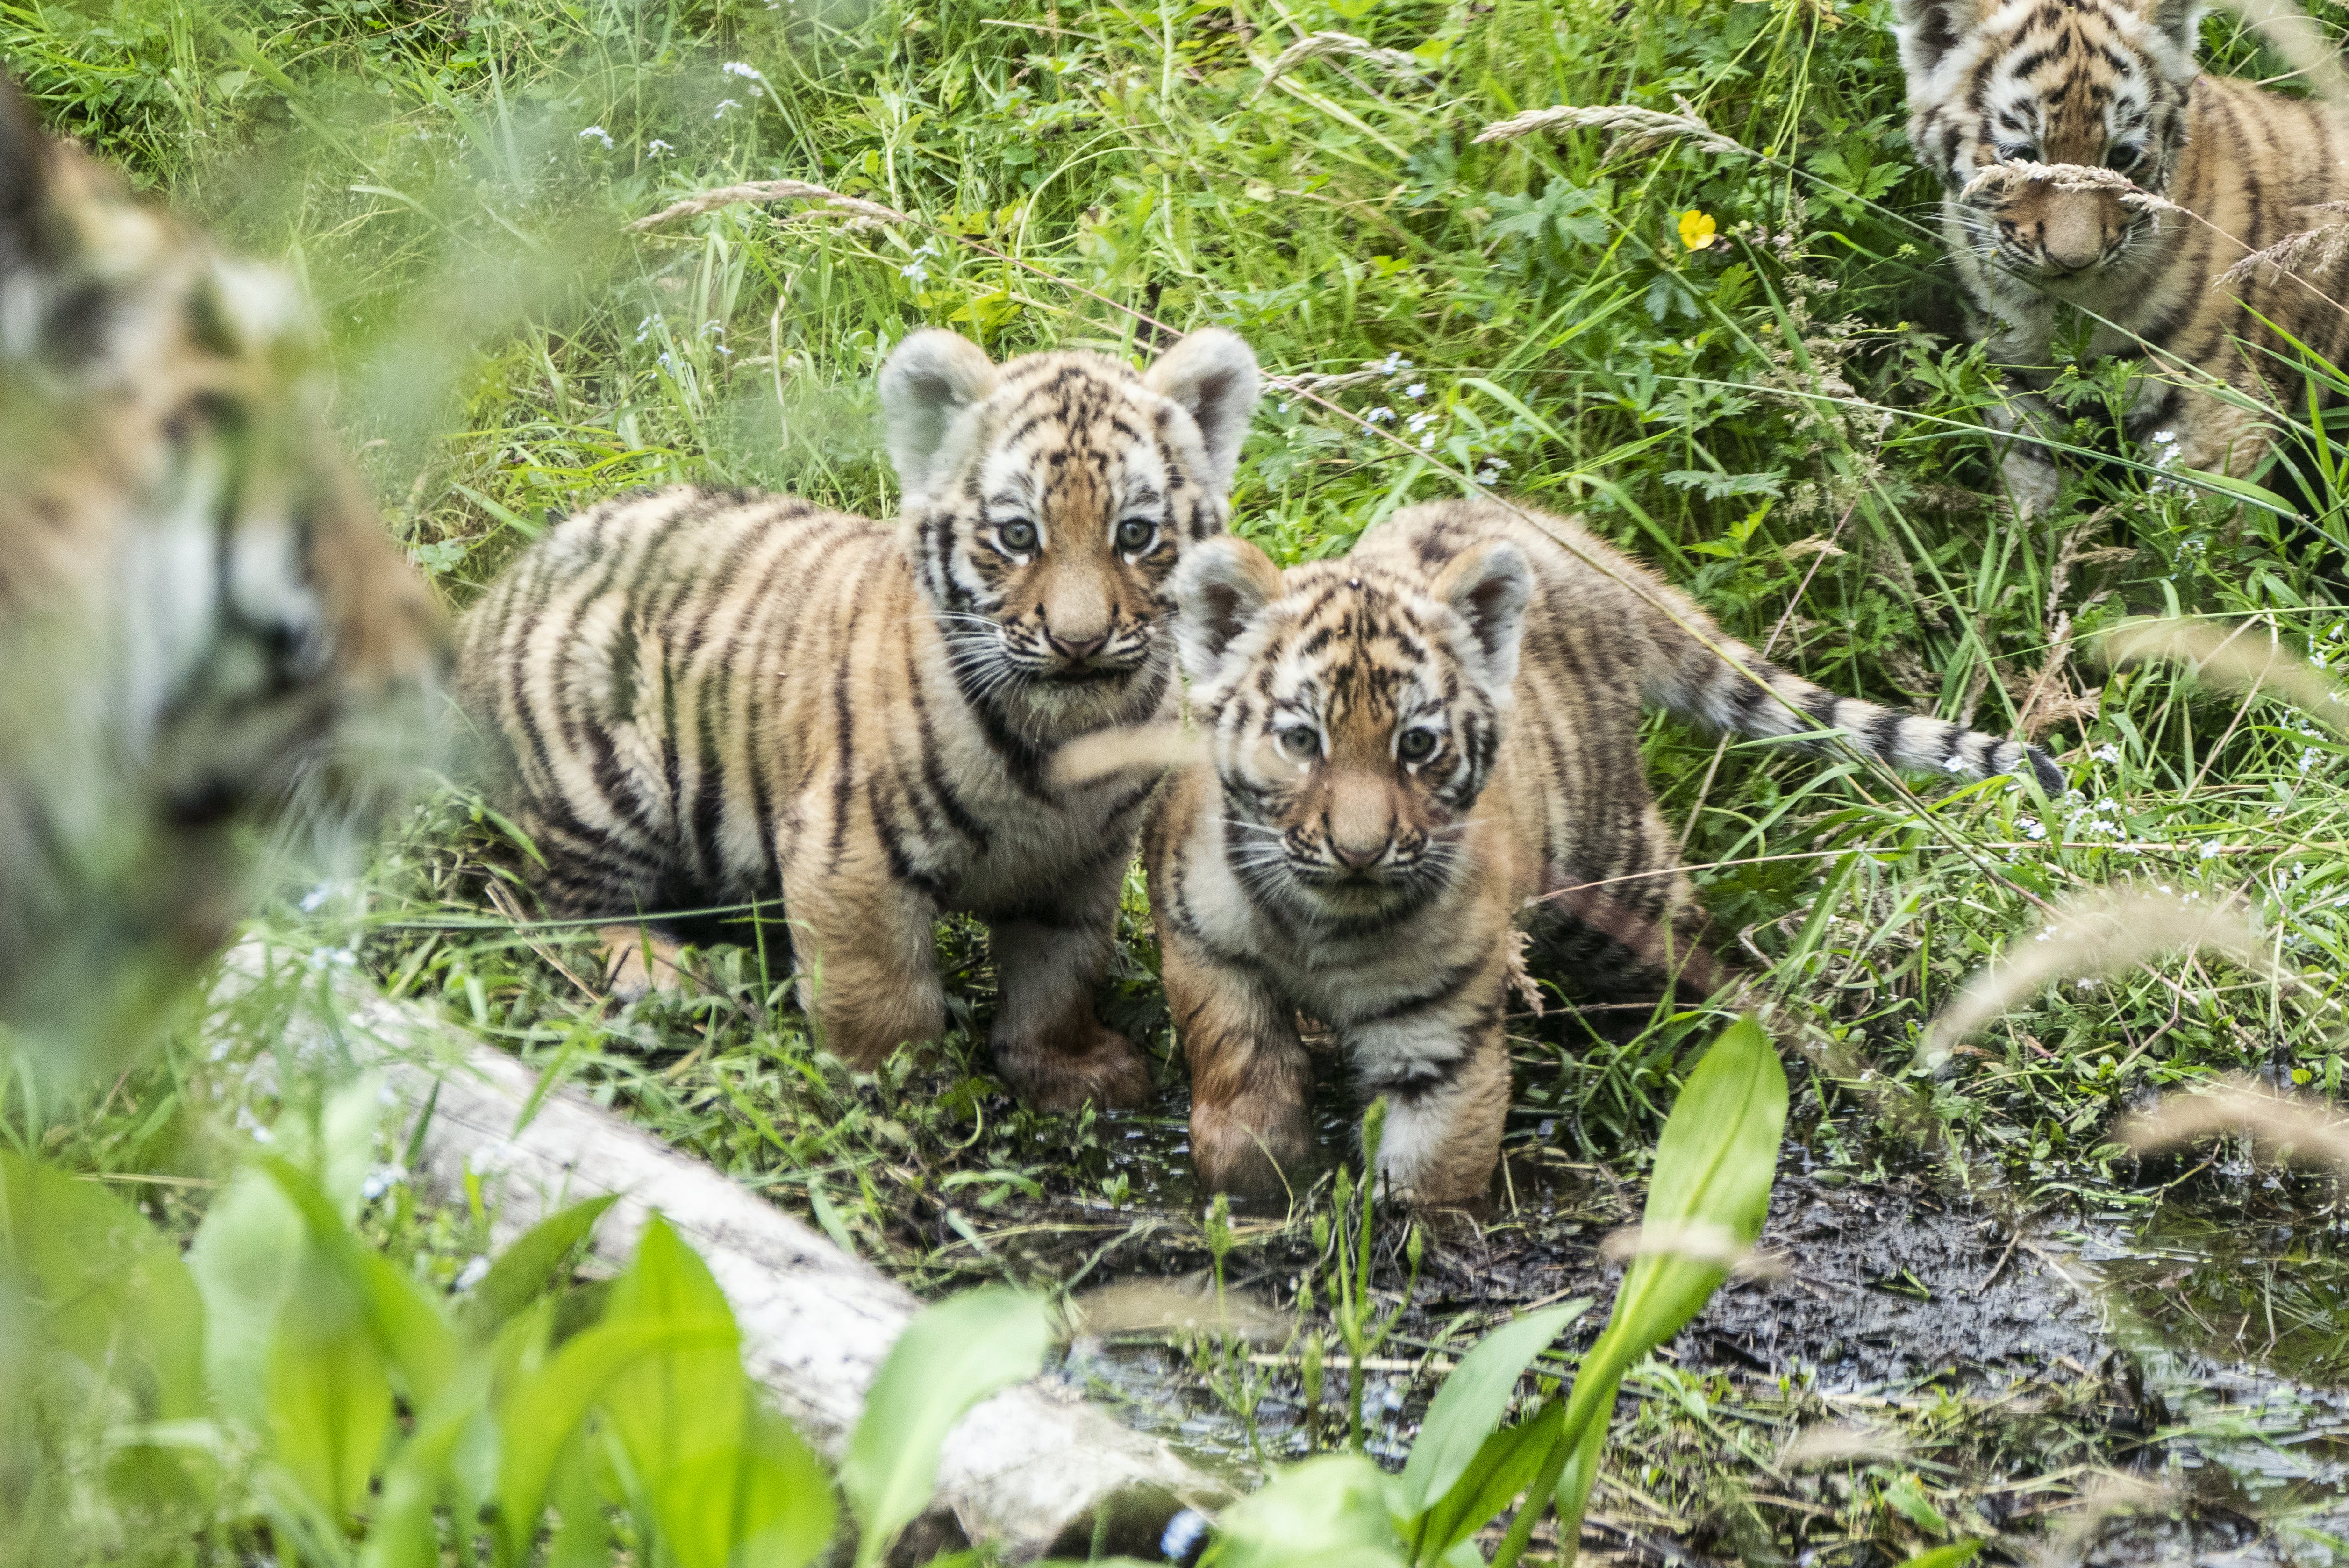 Three Amur tiger cubs explore their outside enclosure for the first time at Highland Wildlife Park near Kingussie in the Highlands (Jane Barlow/PA)